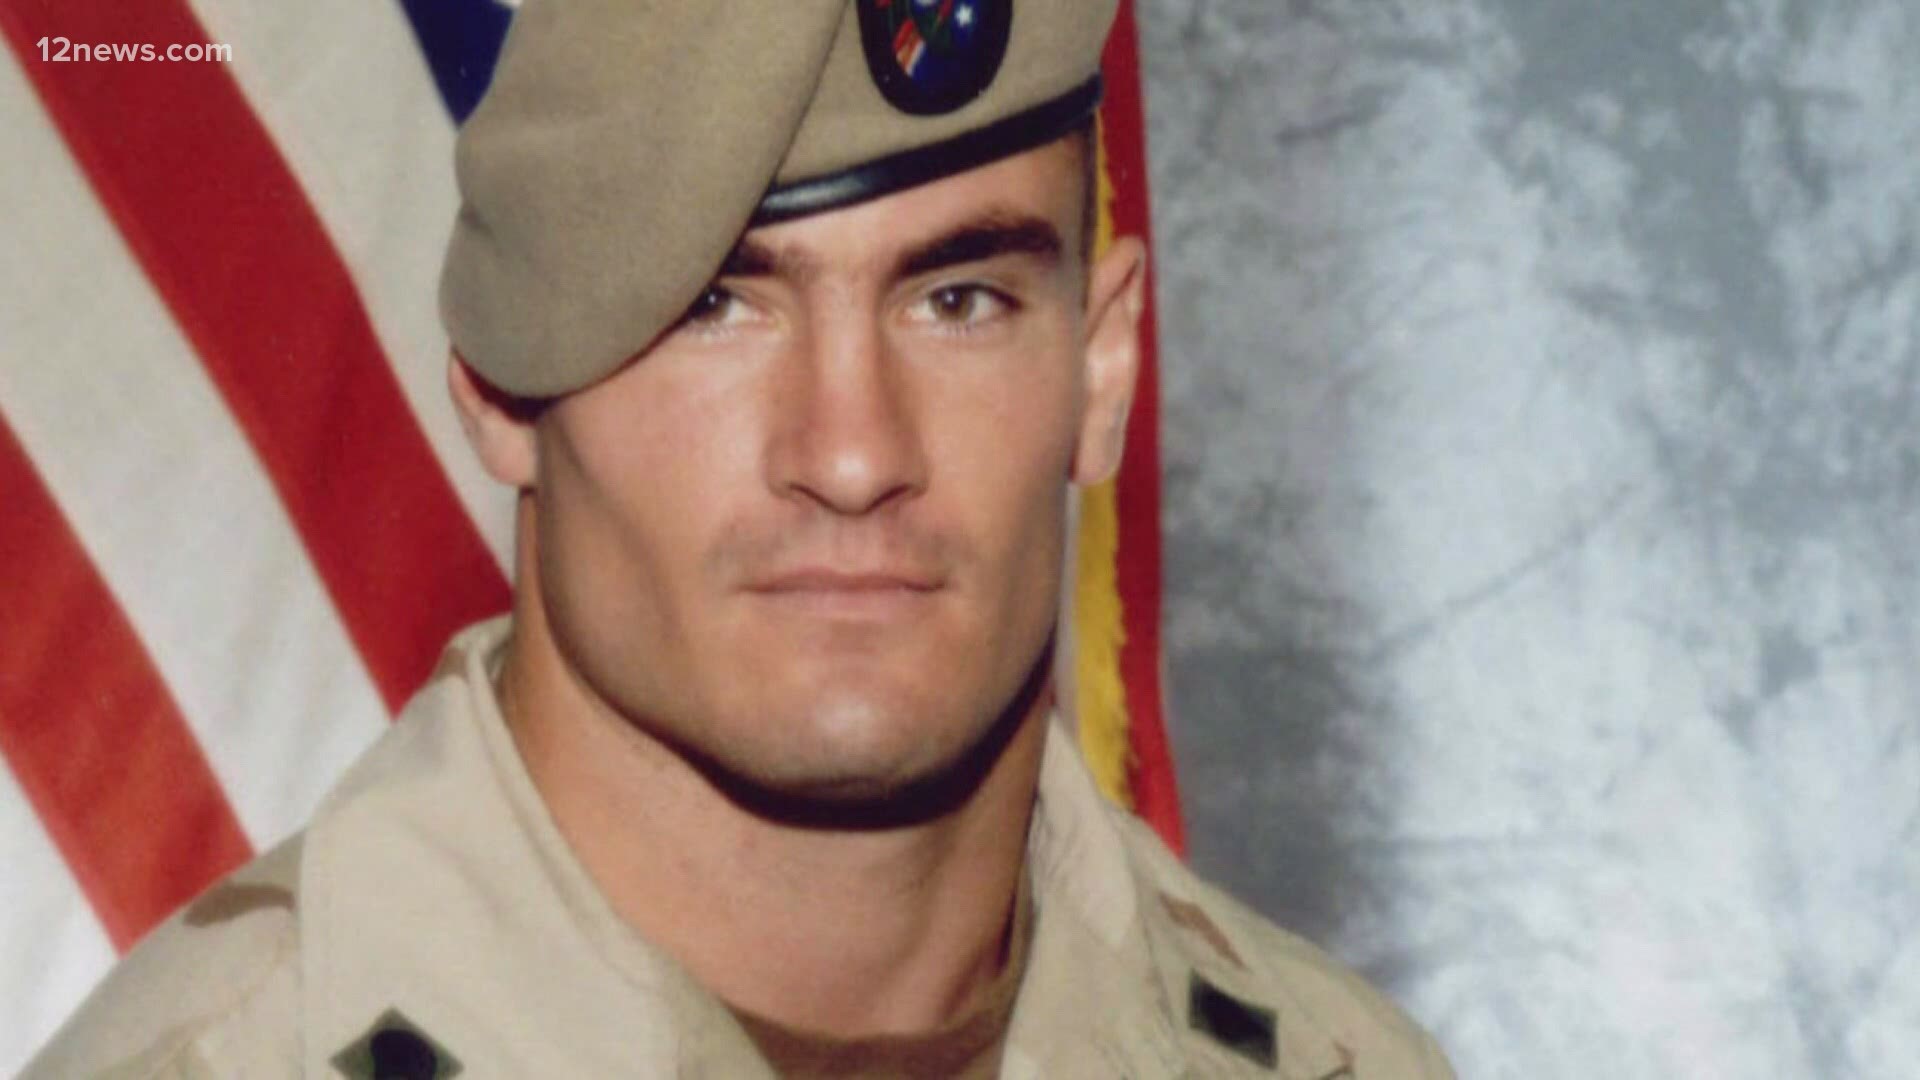 Pat Tillman was killed in Afghanistan 17 years ago. He turned down millions of dollars and left the Arizona Cardinals to enlist in the Army after 9/11.